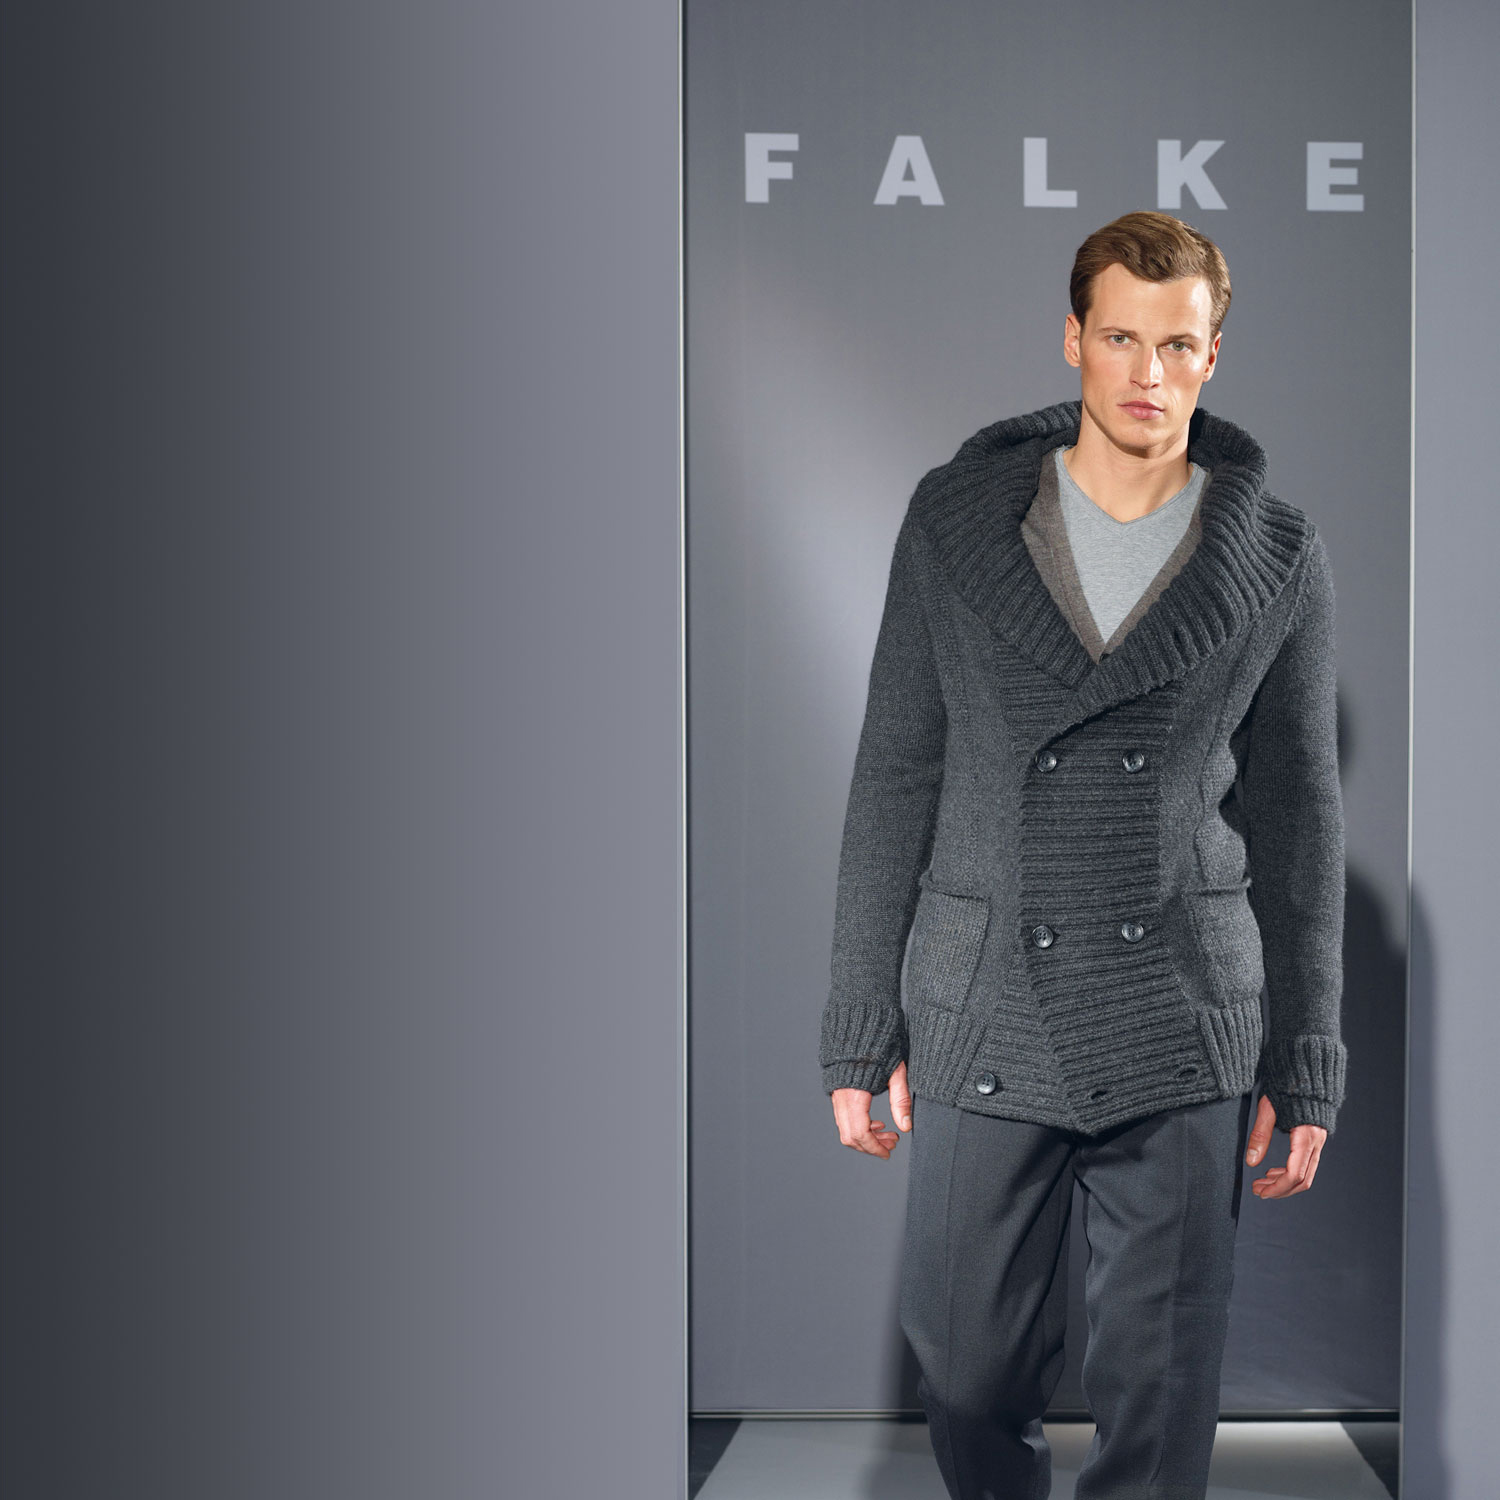 FALKE F/W collection for men 2012